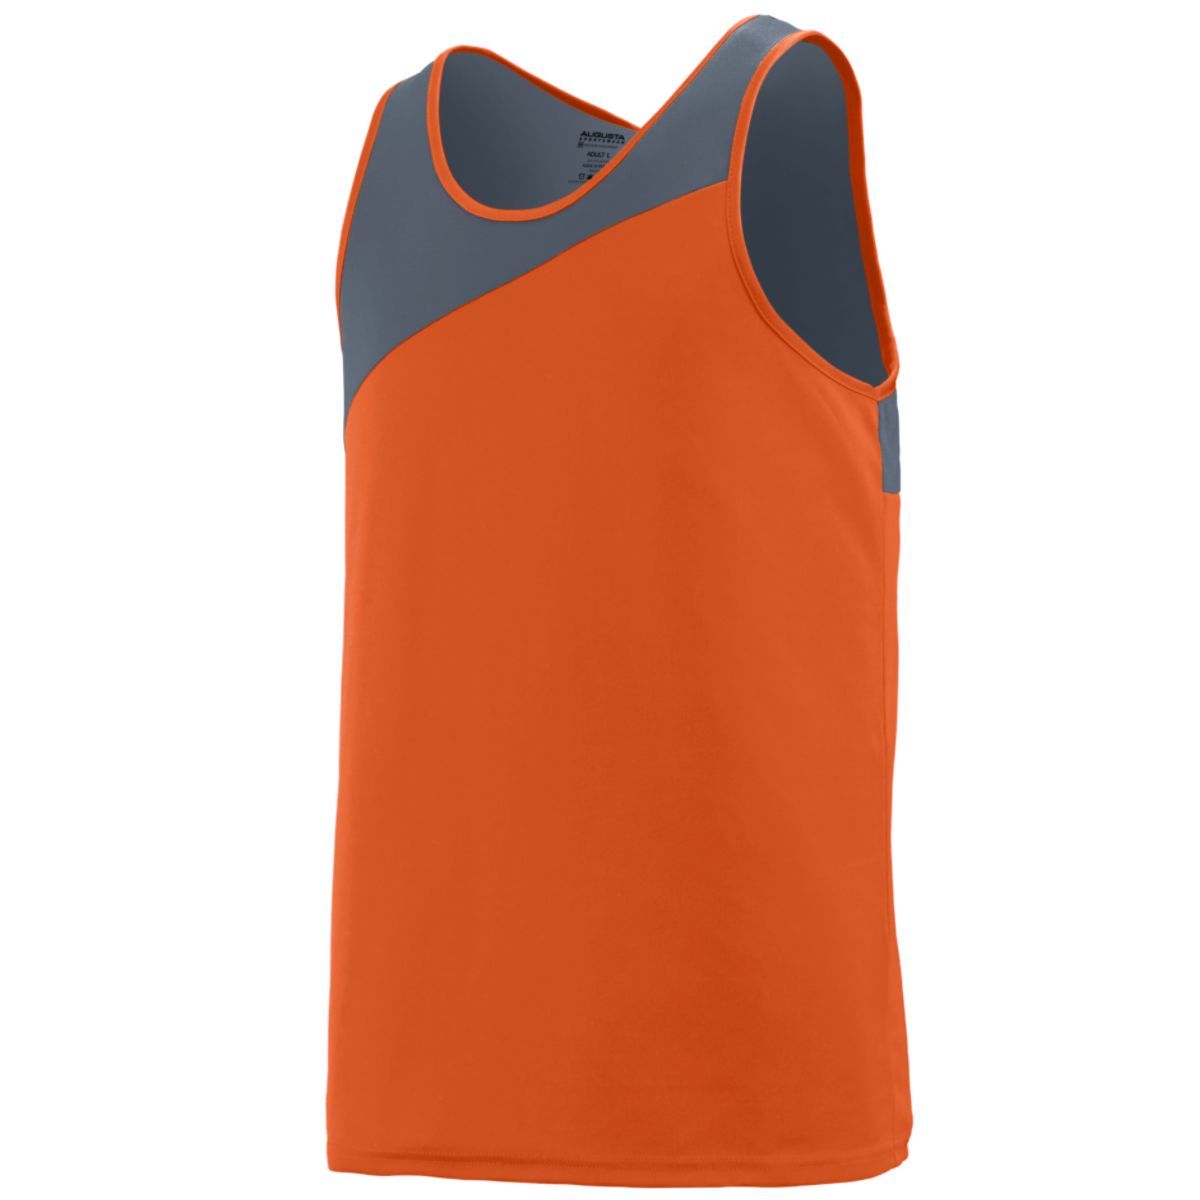 Augusta Sportswear Youth Accelerate Jersey in Orange/Graphite  -Part of the Youth, Youth-Jersey, Augusta-Products, Track-Field, Shirts product lines at KanaleyCreations.com